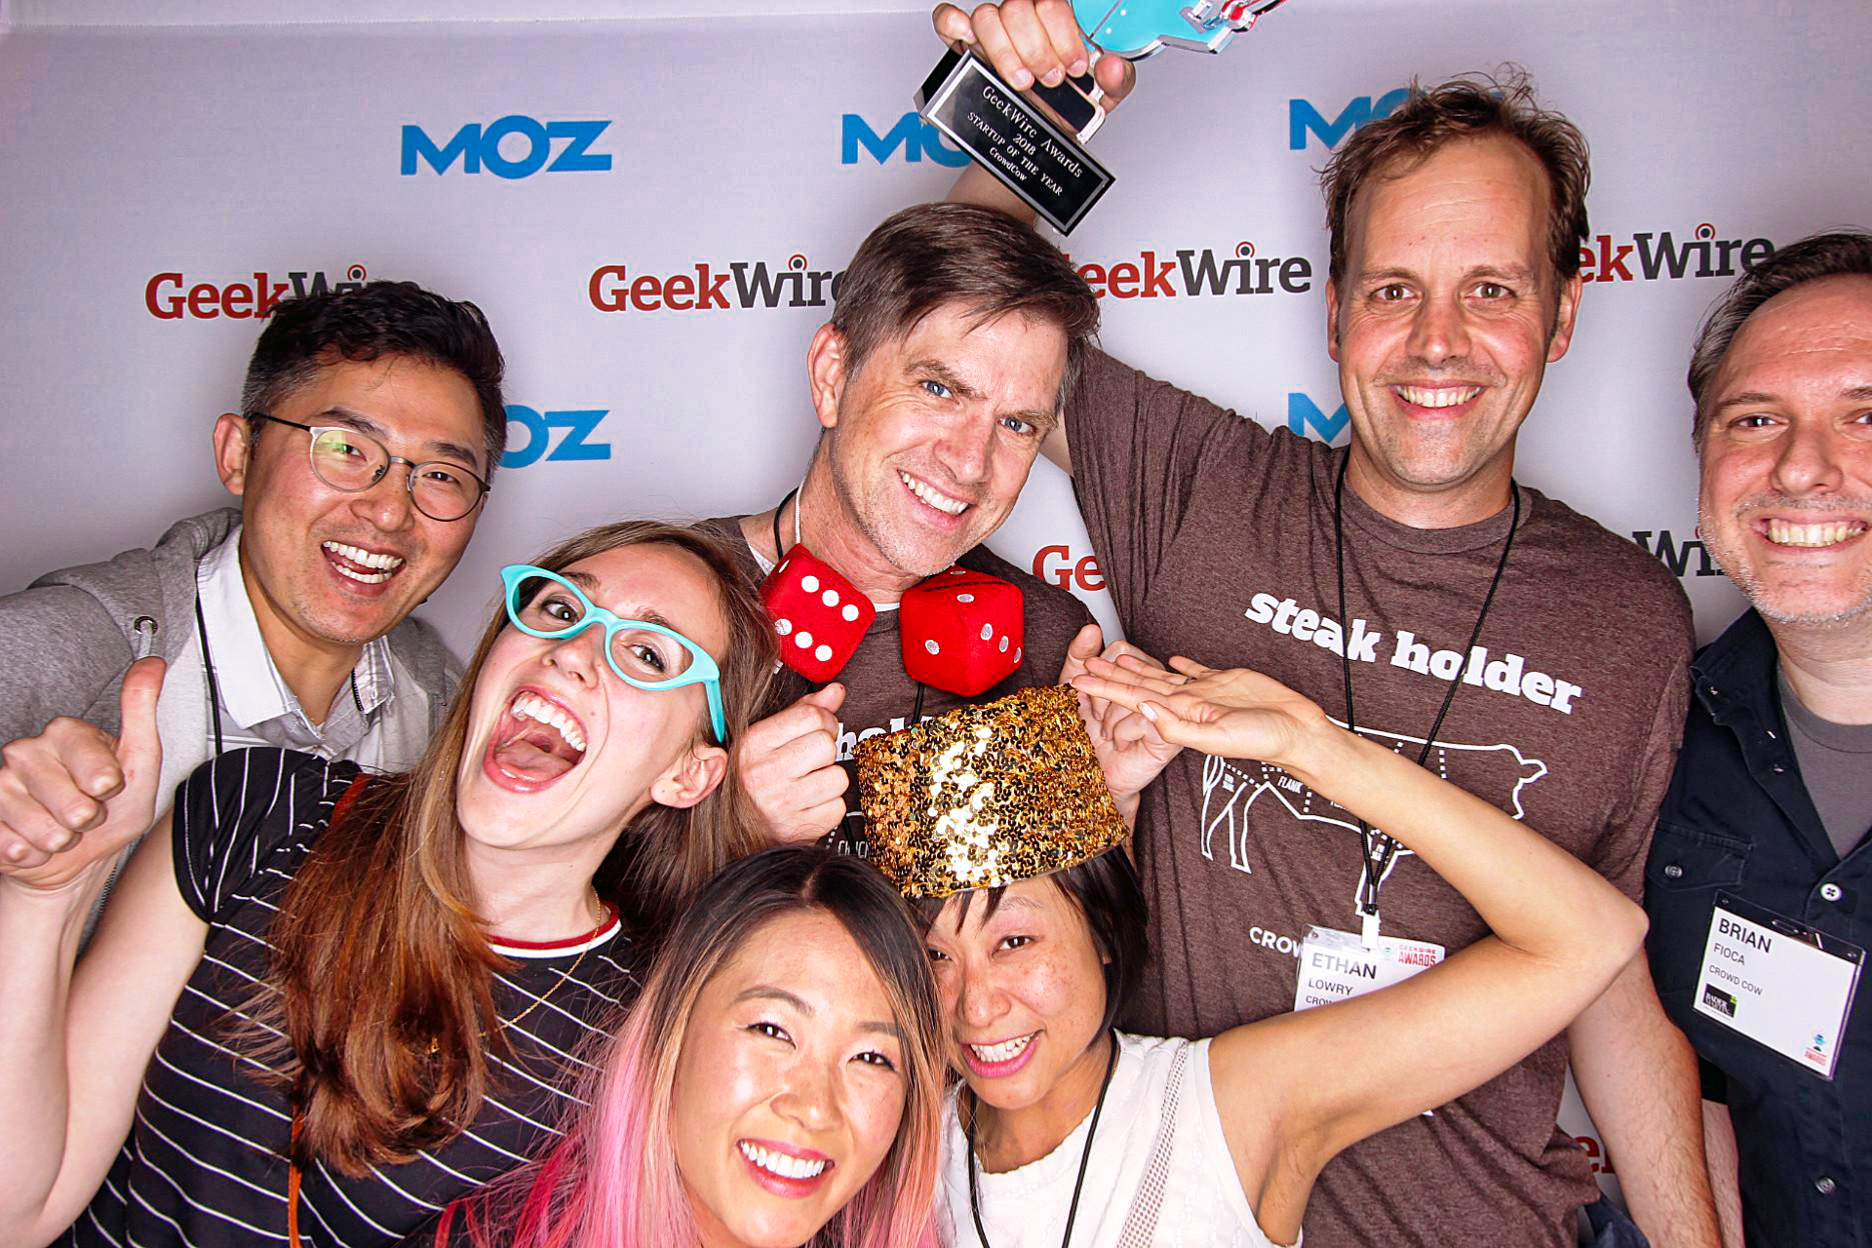 Crowd Cow is Geekwire's Startup of the Year